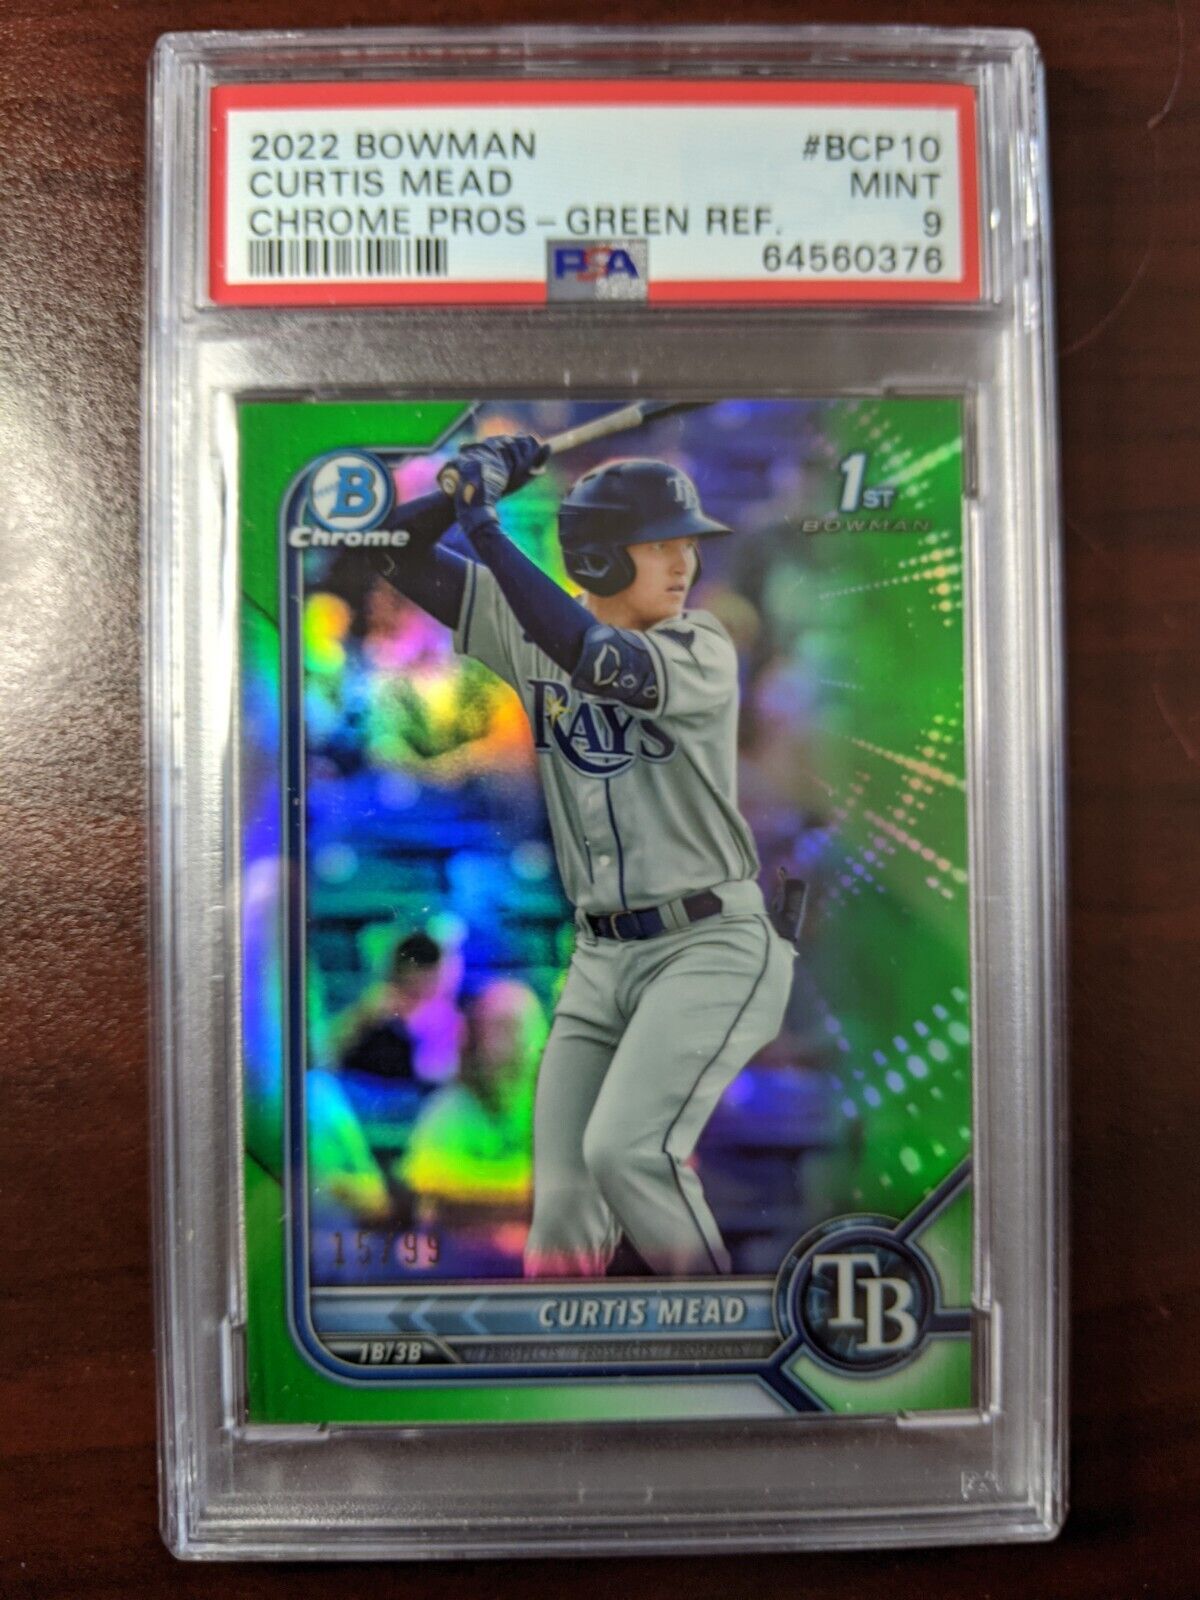 Curtis Mead 2022 Bowman Chrome Green Refractor #/99 BCP-10 Tampa Bay Rays